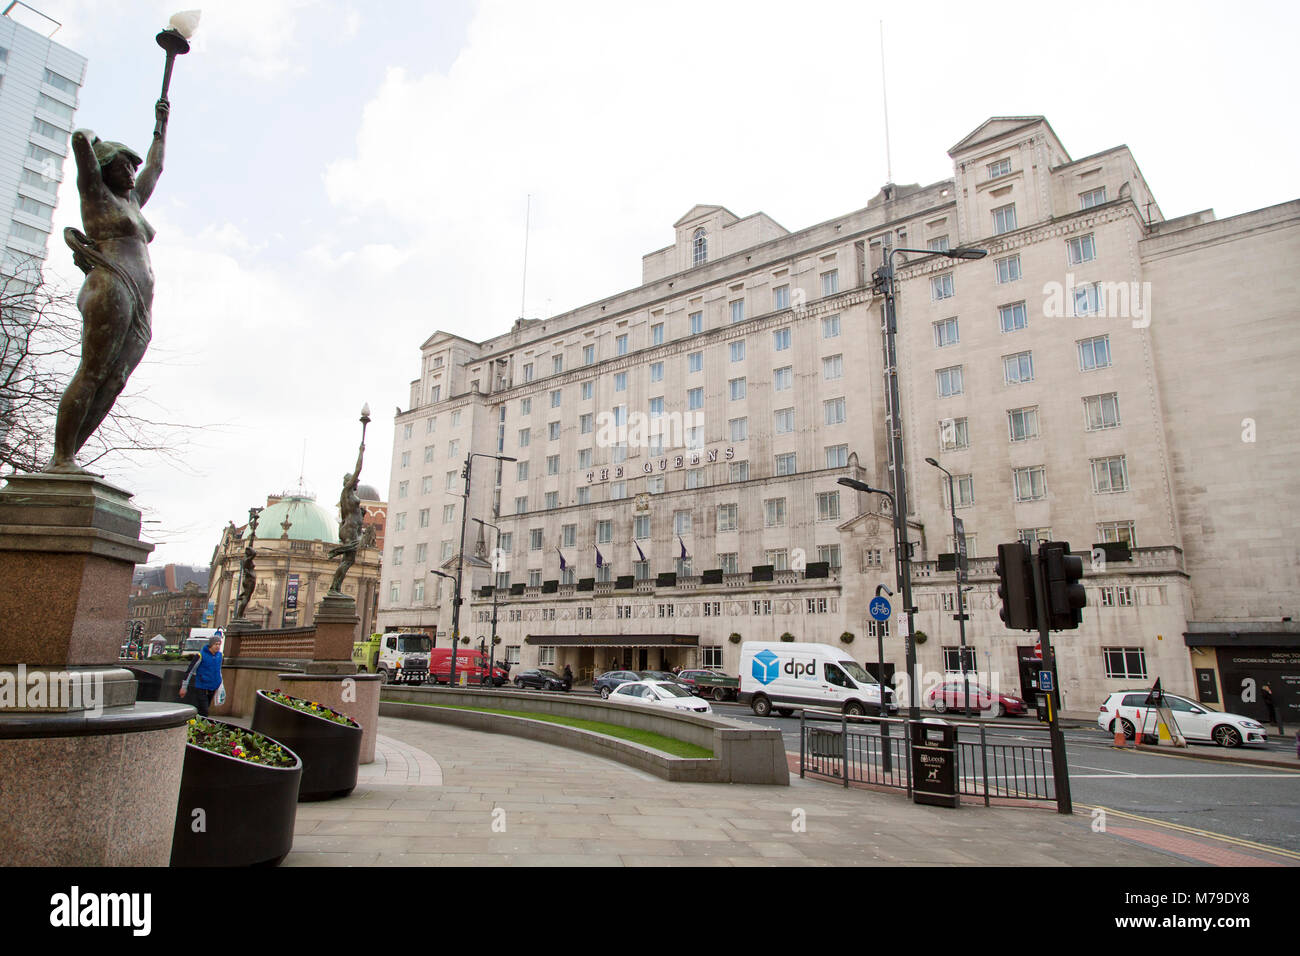 The Queens hotel at City Square in Leeds, UK. The hotel dates from the 1930s Stock Photo